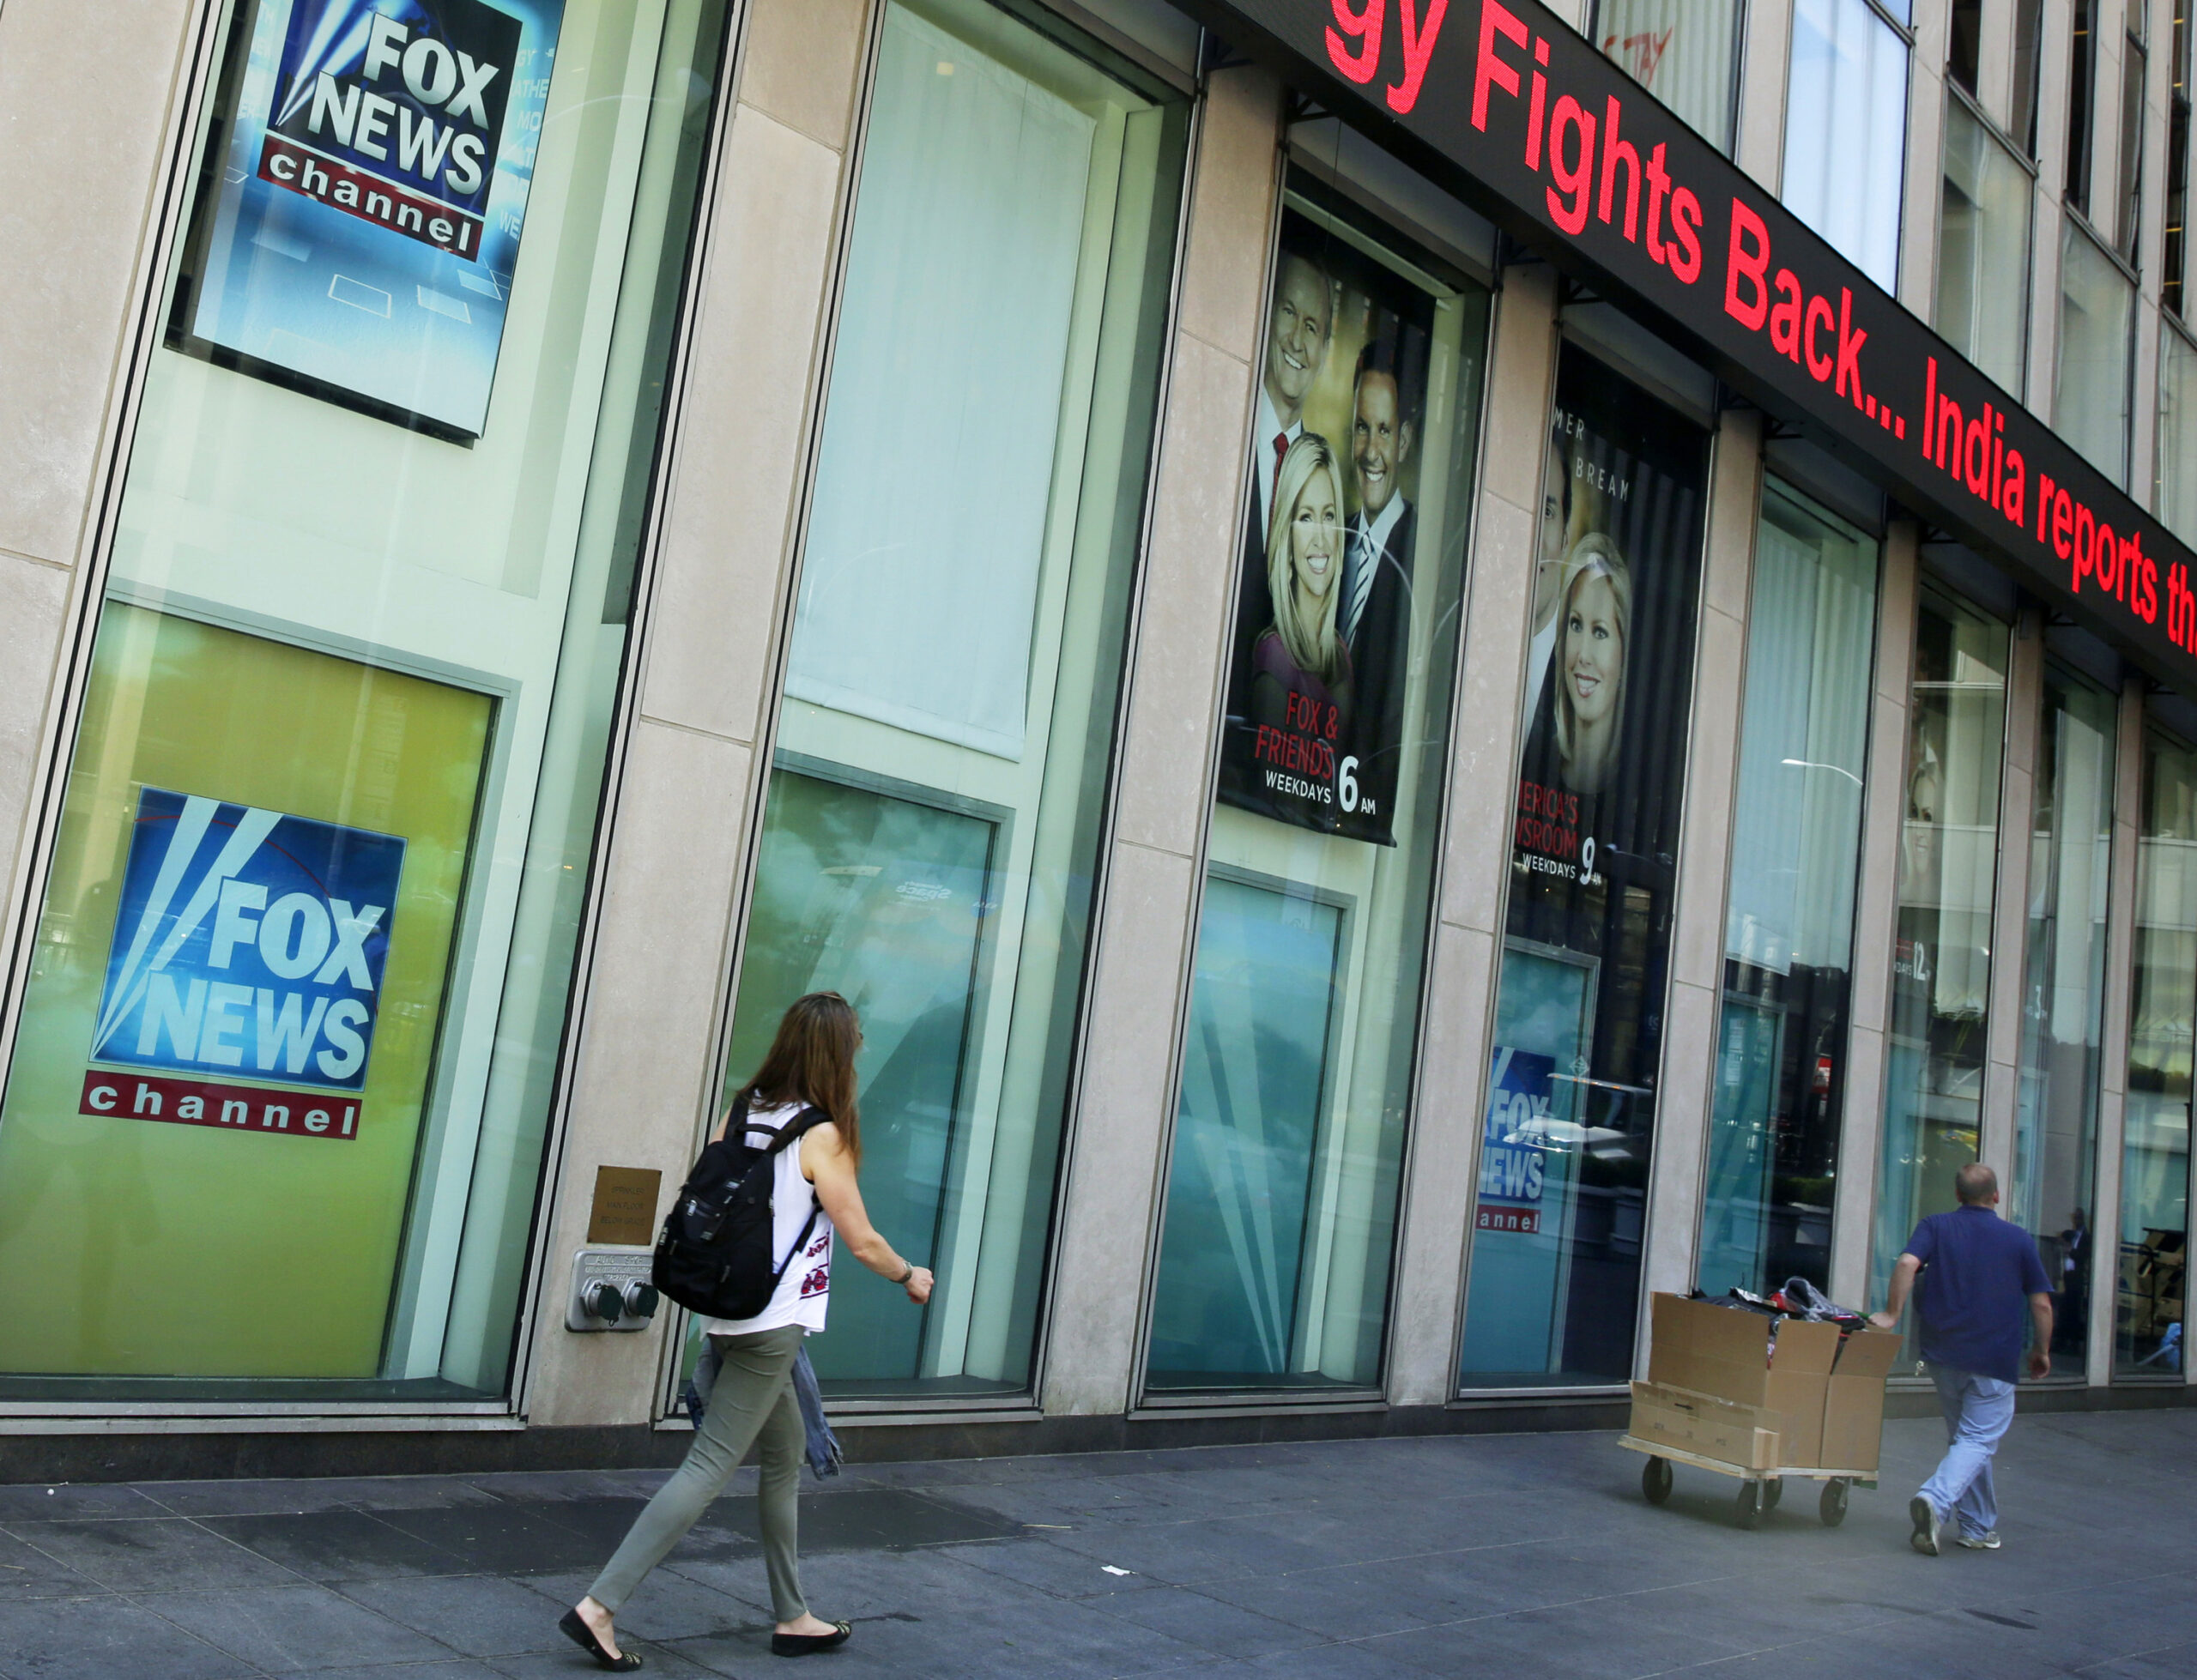 FILE- People pass the News Corporation headquarters building and Fox News studios in New York on Aug. 1, 2017. New York City's human rights commission has fined Fox News $1 million for violation of laws protecting against sexual harassment and job retaliation. It's the largest such penalty in the commission's history. (AP Photo/Richard Drew, File)